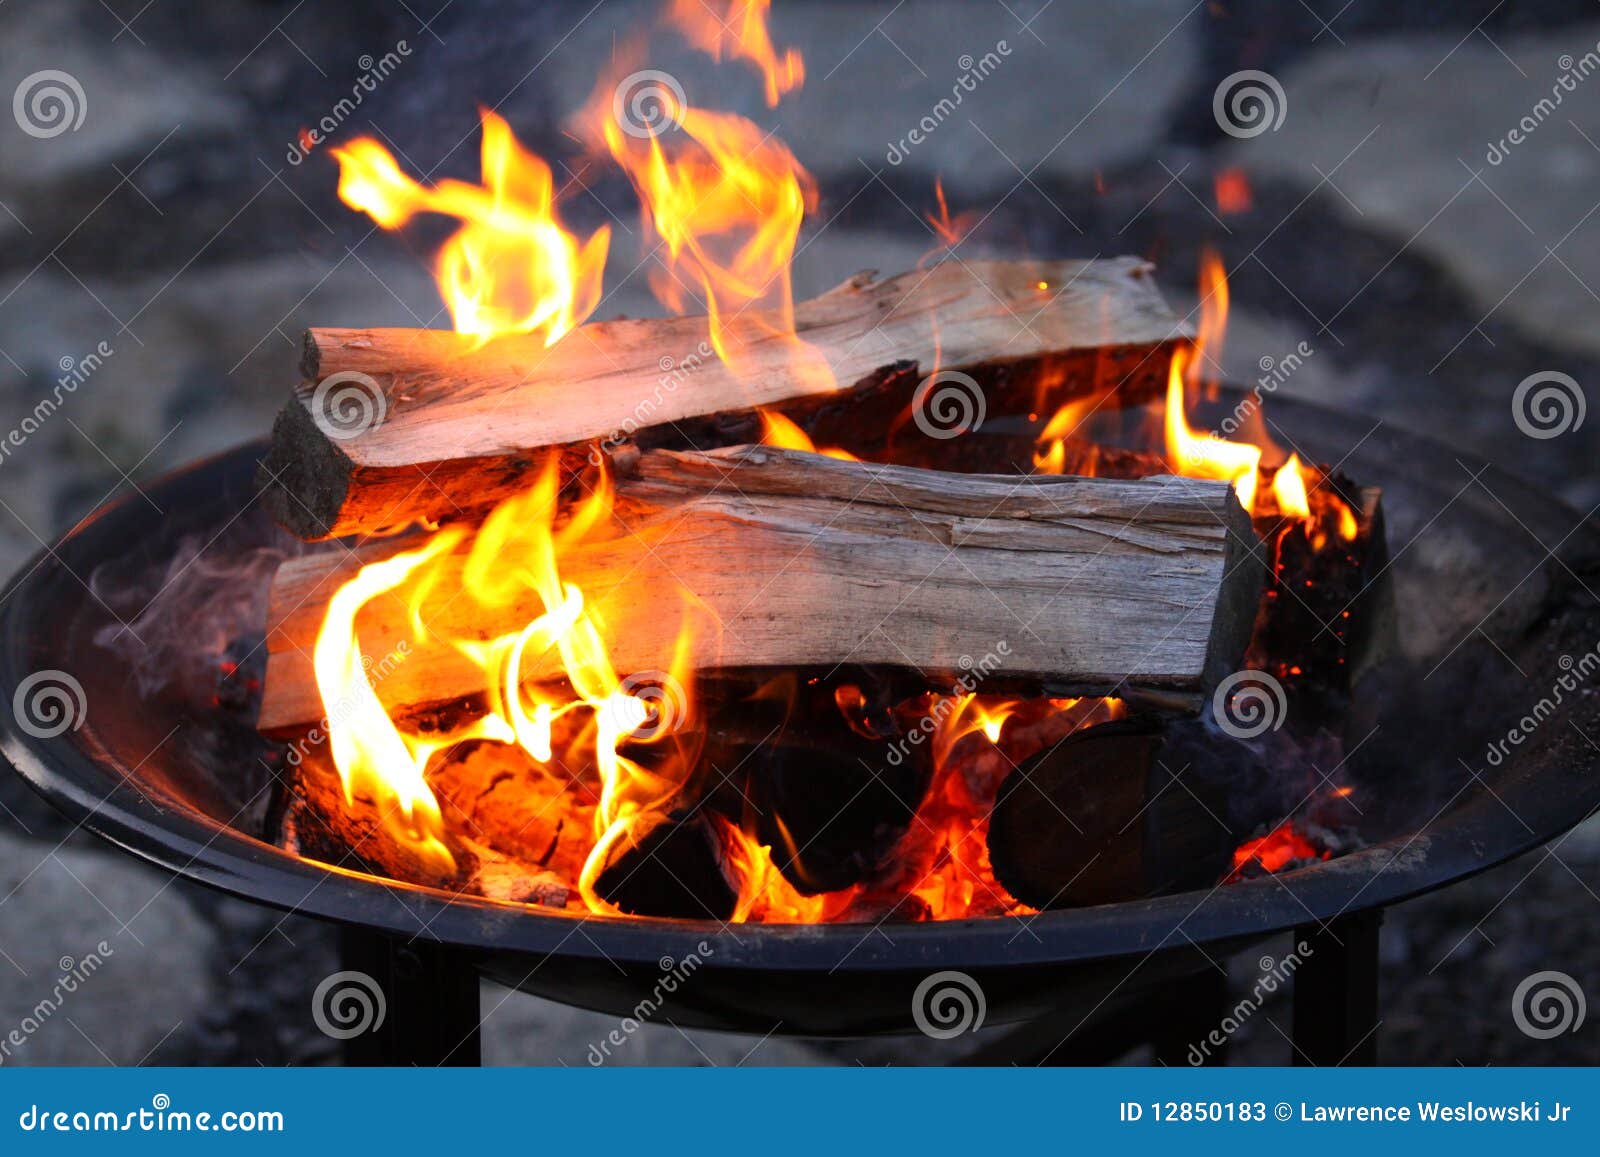 logs burning in a fire pit